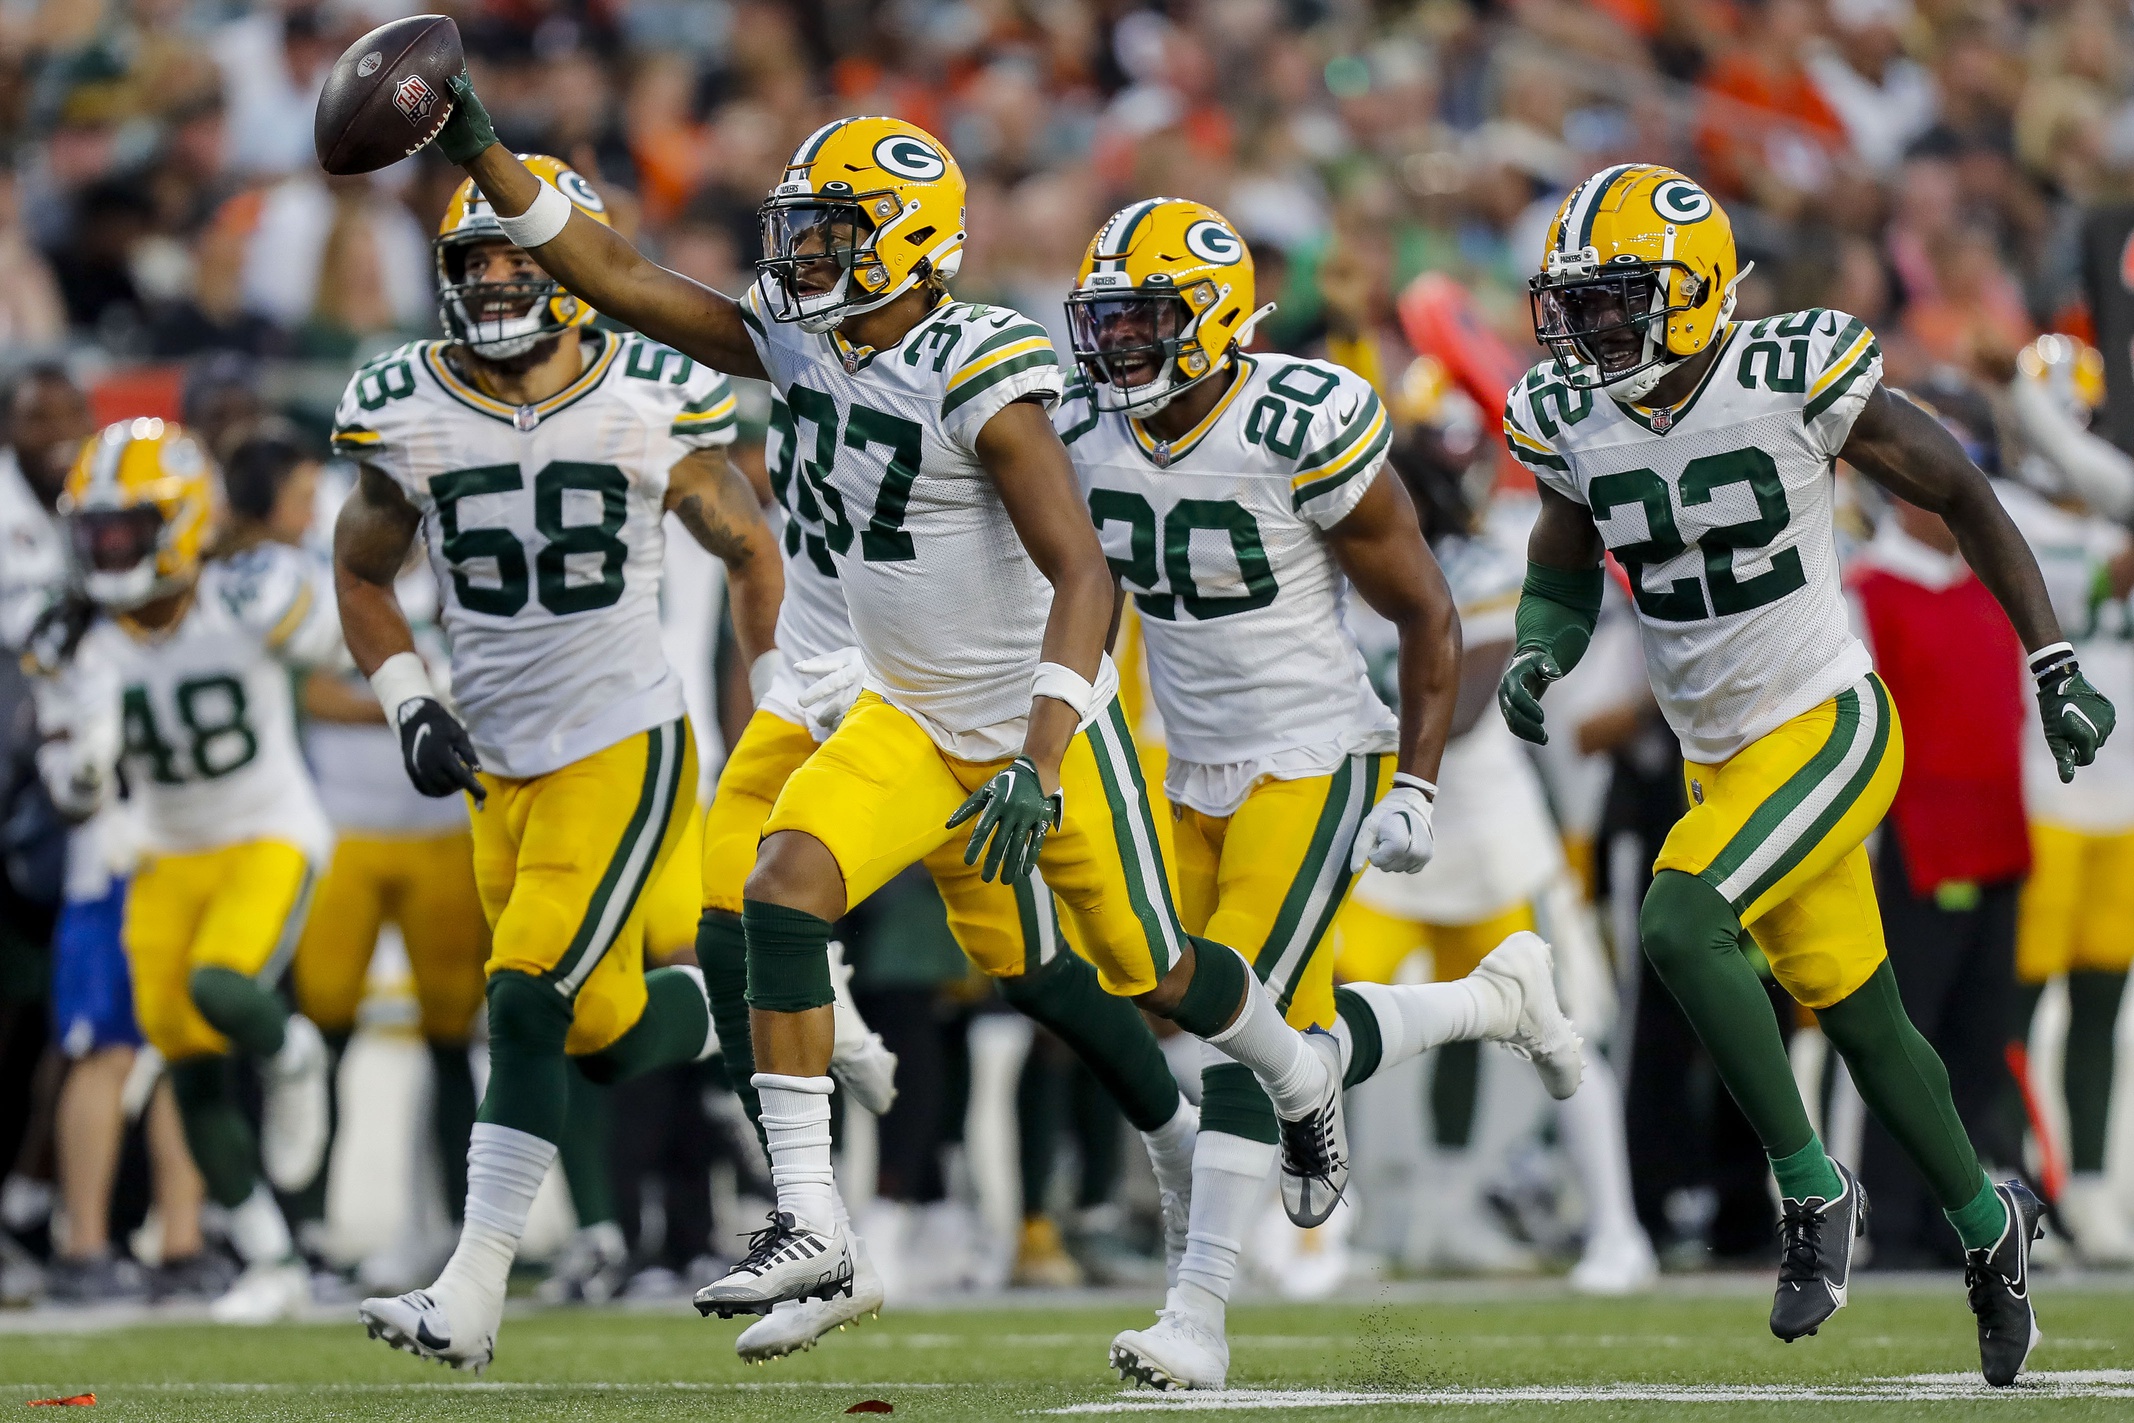 Green Bay Packers RB Aaron Jones on Keeping Father's Memory Alive